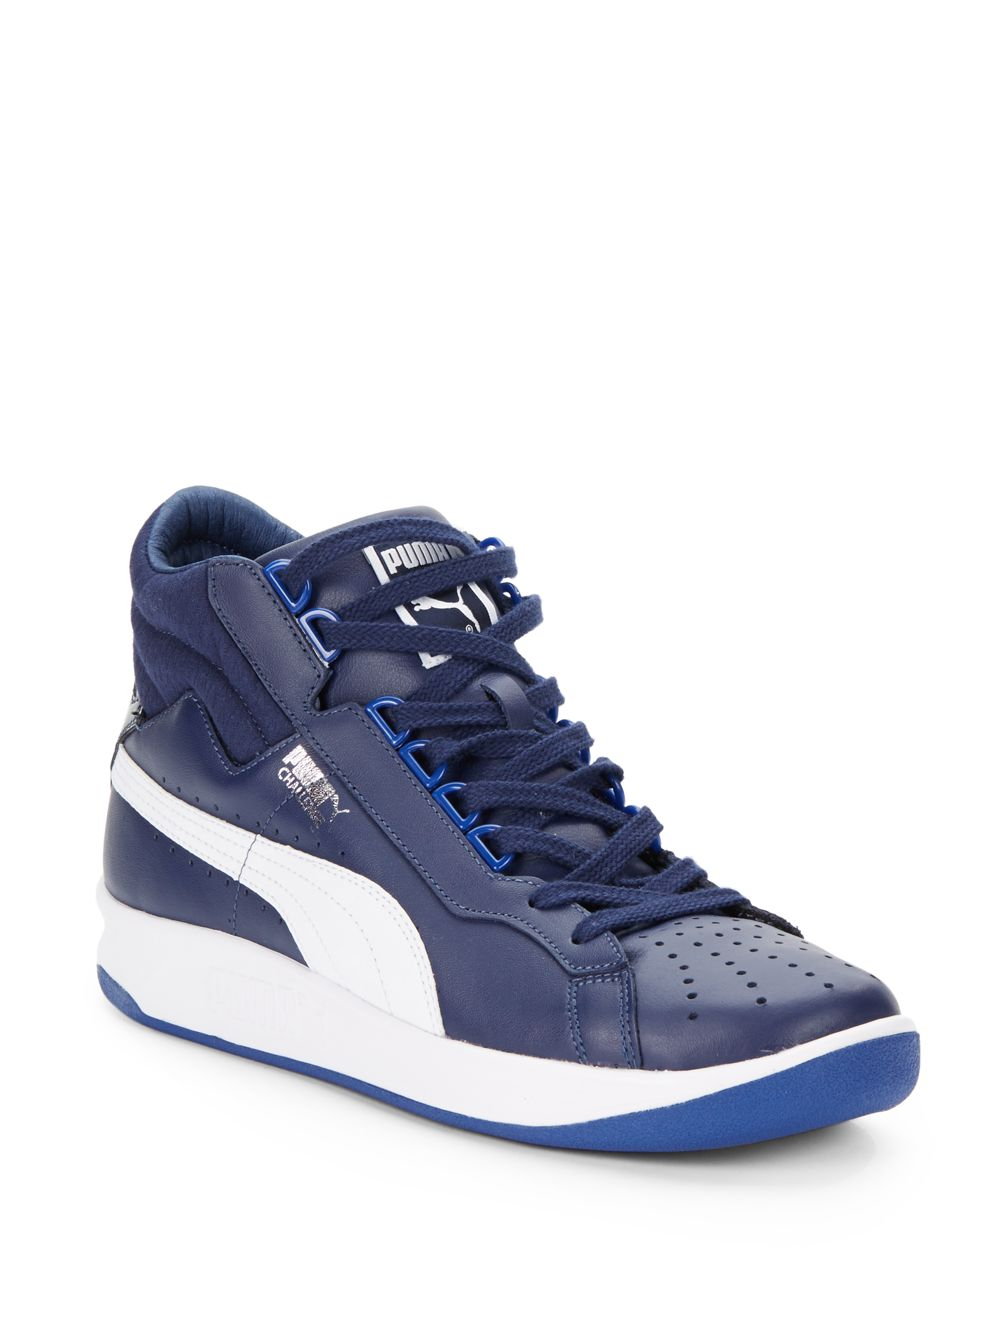 PUMA Challenge Leather Sneakers in Blue 